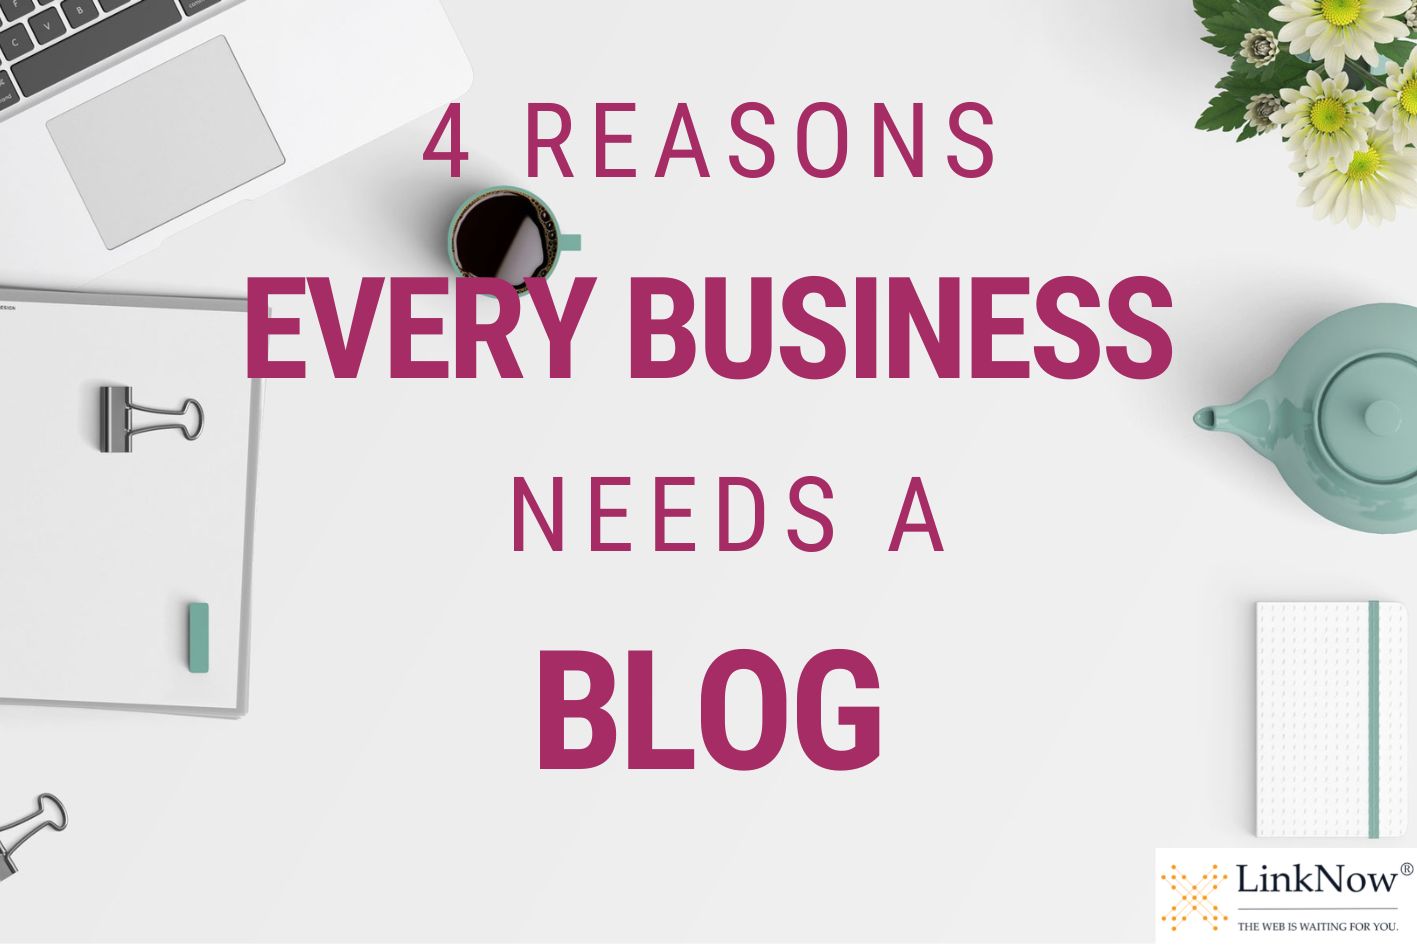 Background shows a workspace with a laptop, notebook, and teapot. Caption says: 4 reasons every business needs a blog.